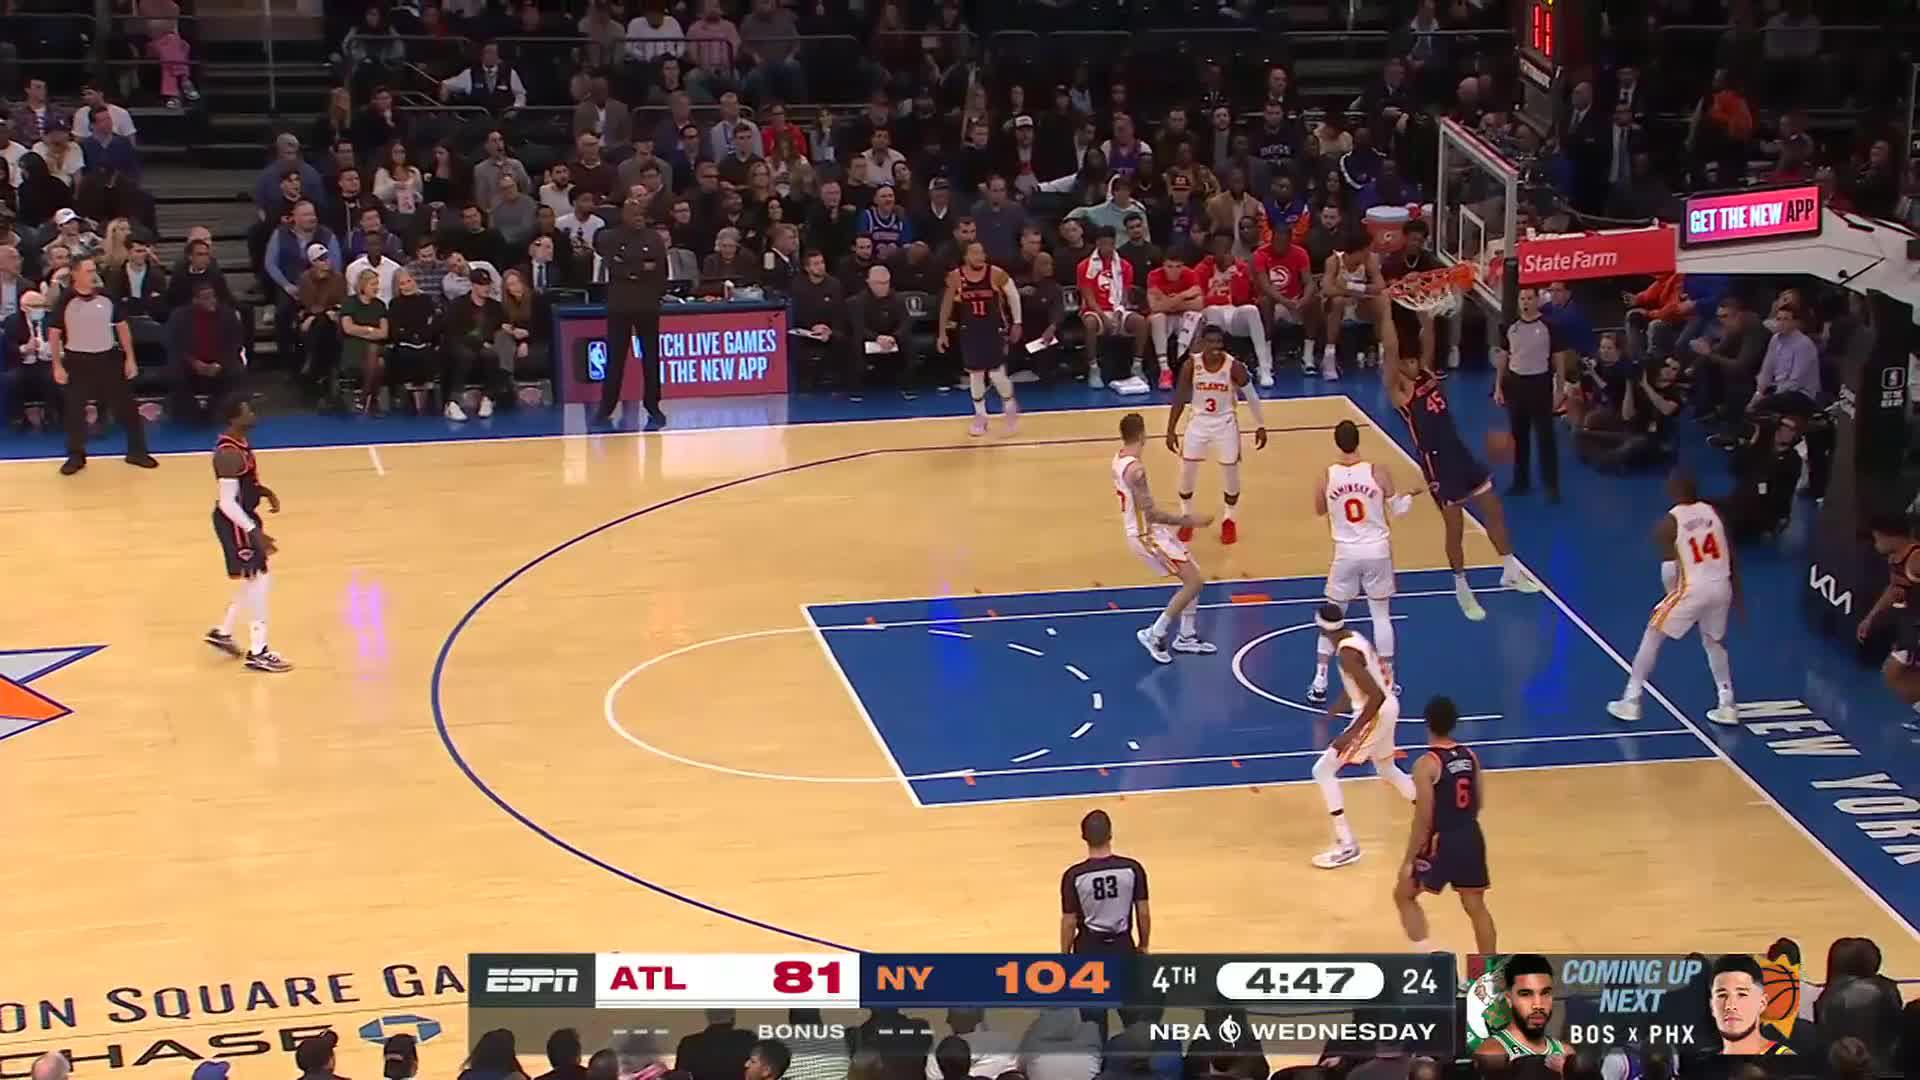 Jericho Sims goes up to get it and finishes the oop